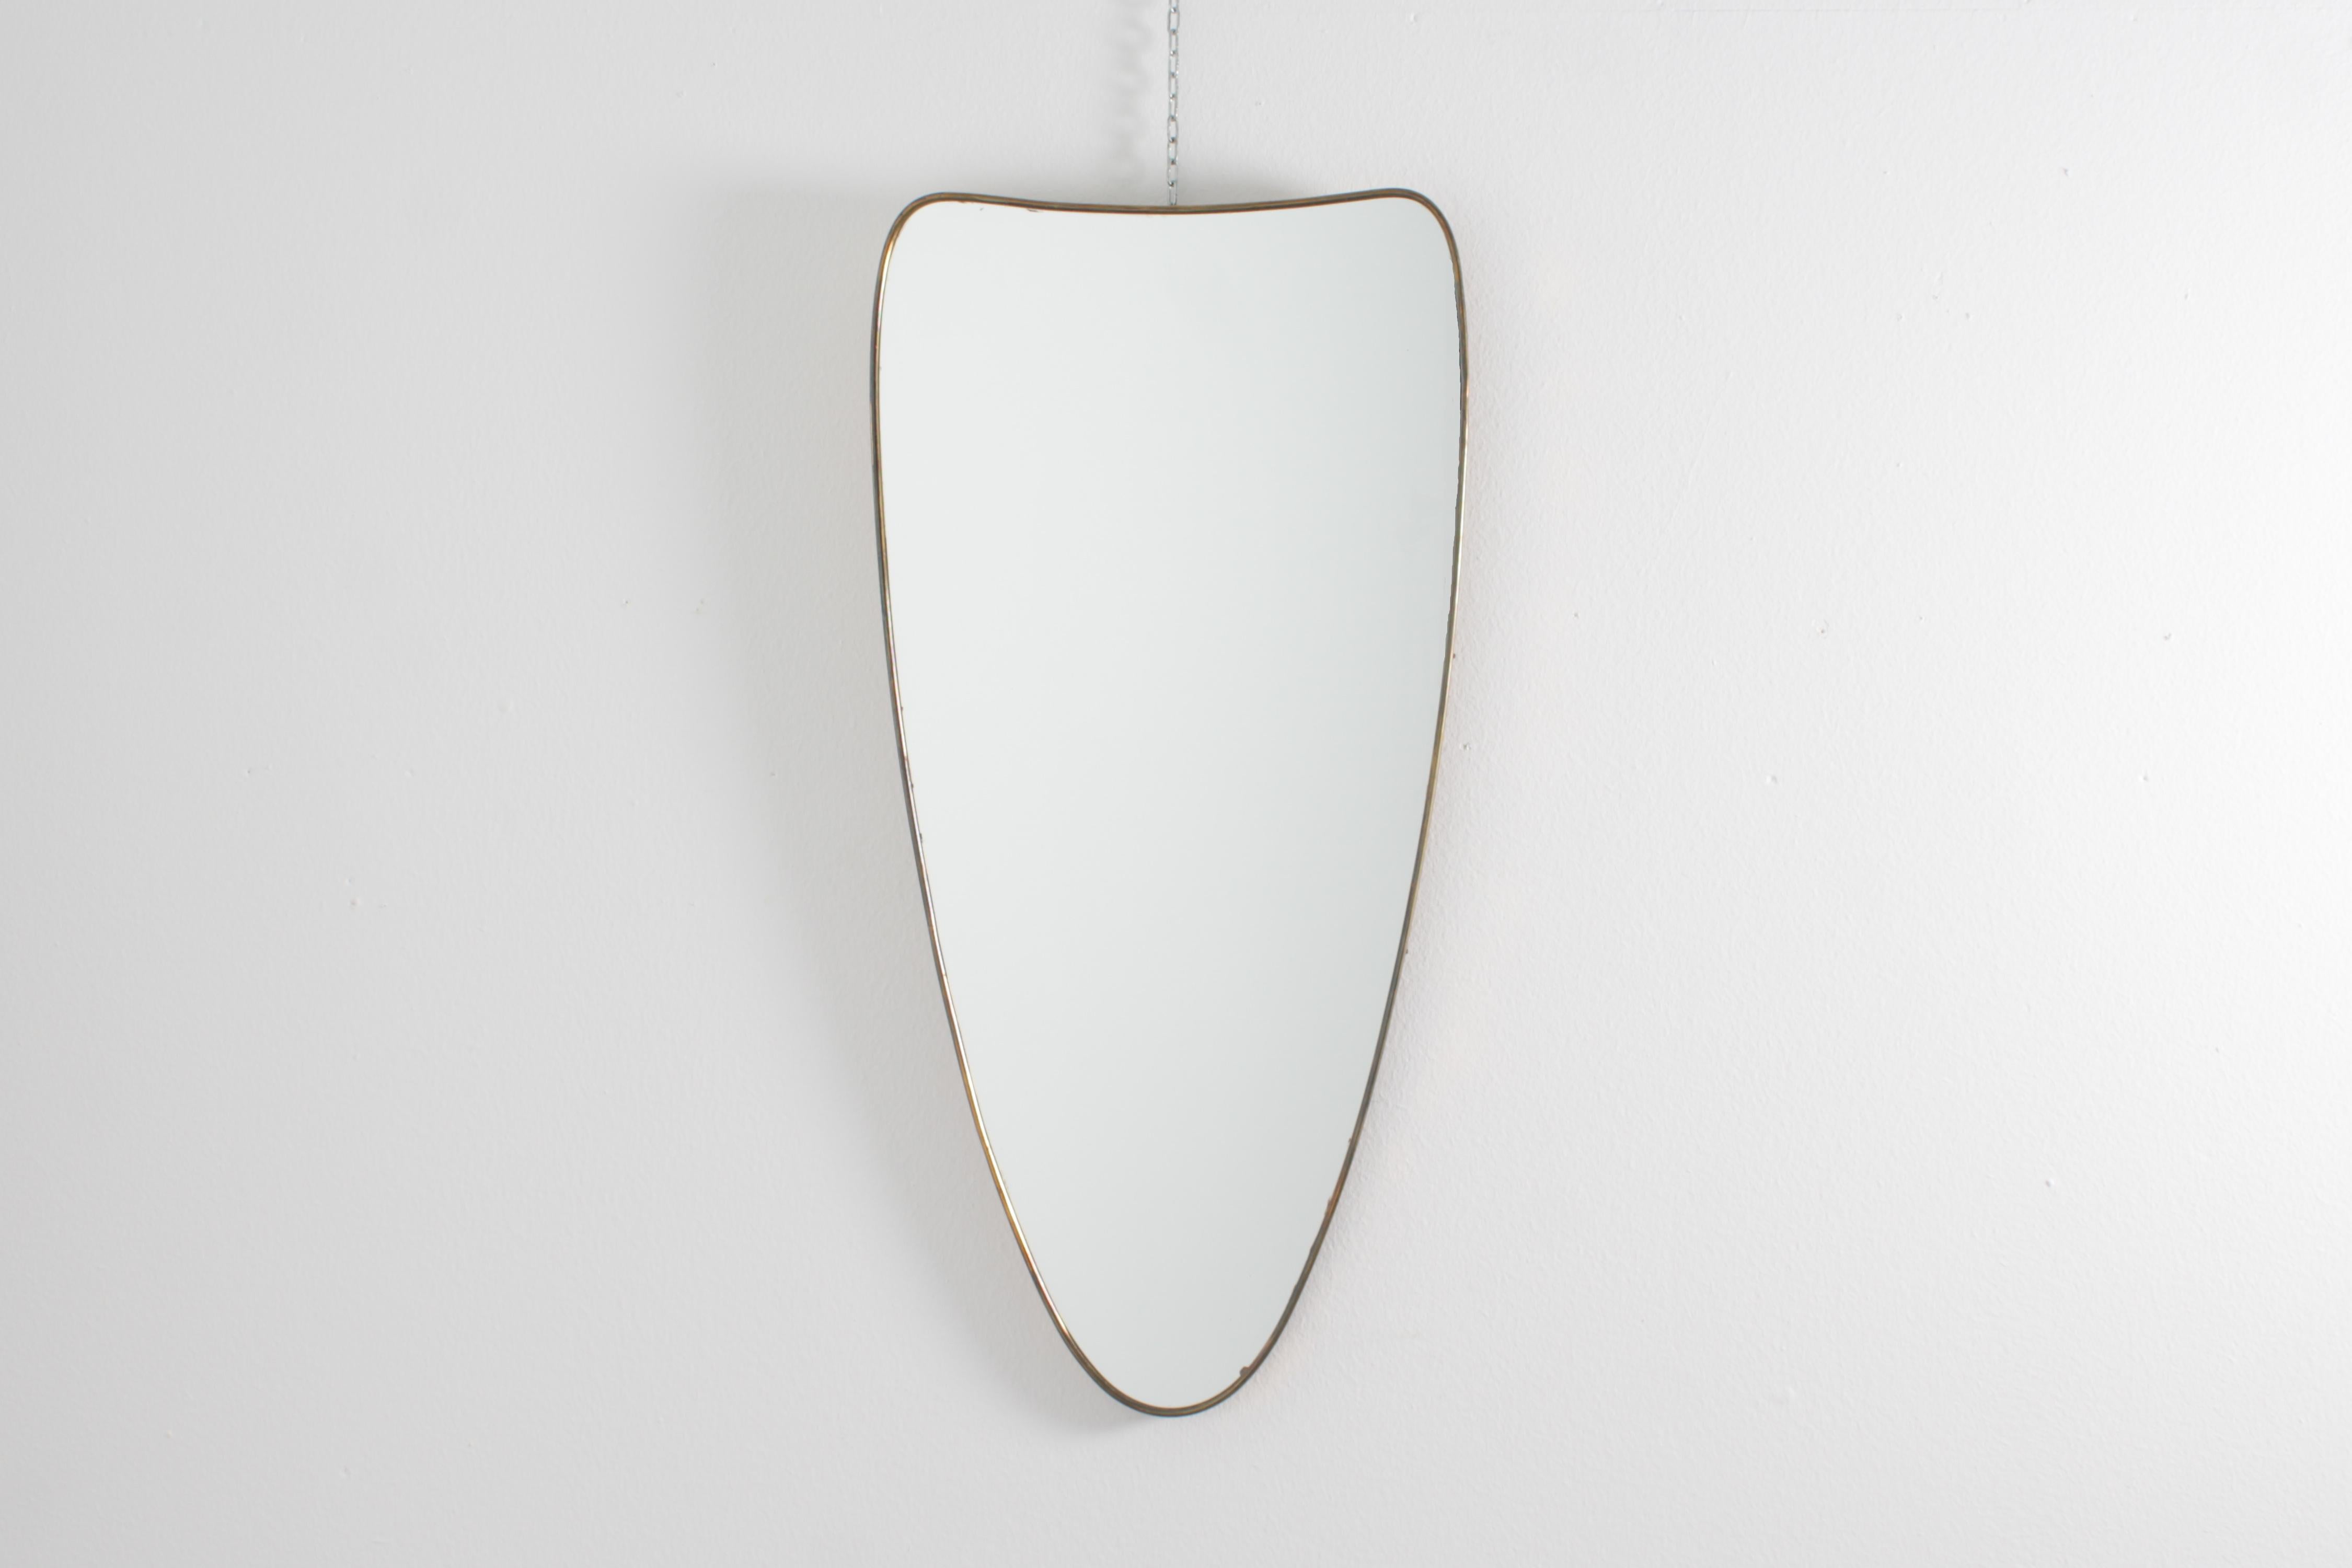 Stylish shield-shaped wall mirror, with narrow frame in golden brass. Valuable Italian production from the 1950s in the style of Giò Ponti.
Wear consistent with age and use.